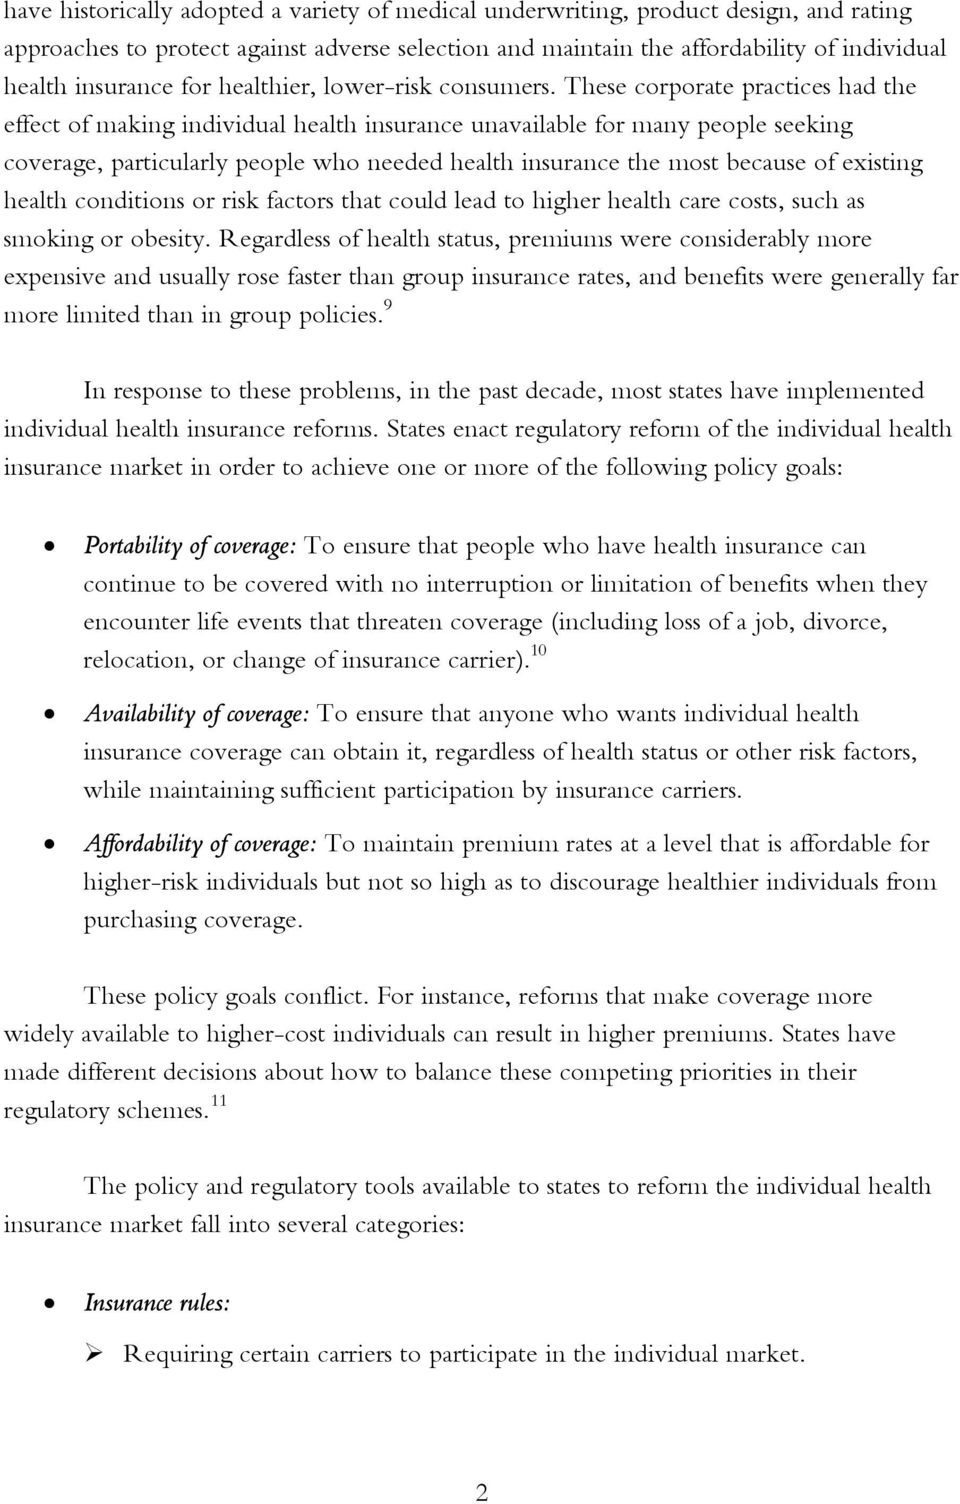 These corporate practices had the effect of making individual health insurance unavailable for many people seeking coverage, particularly people who needed health insurance the most because of